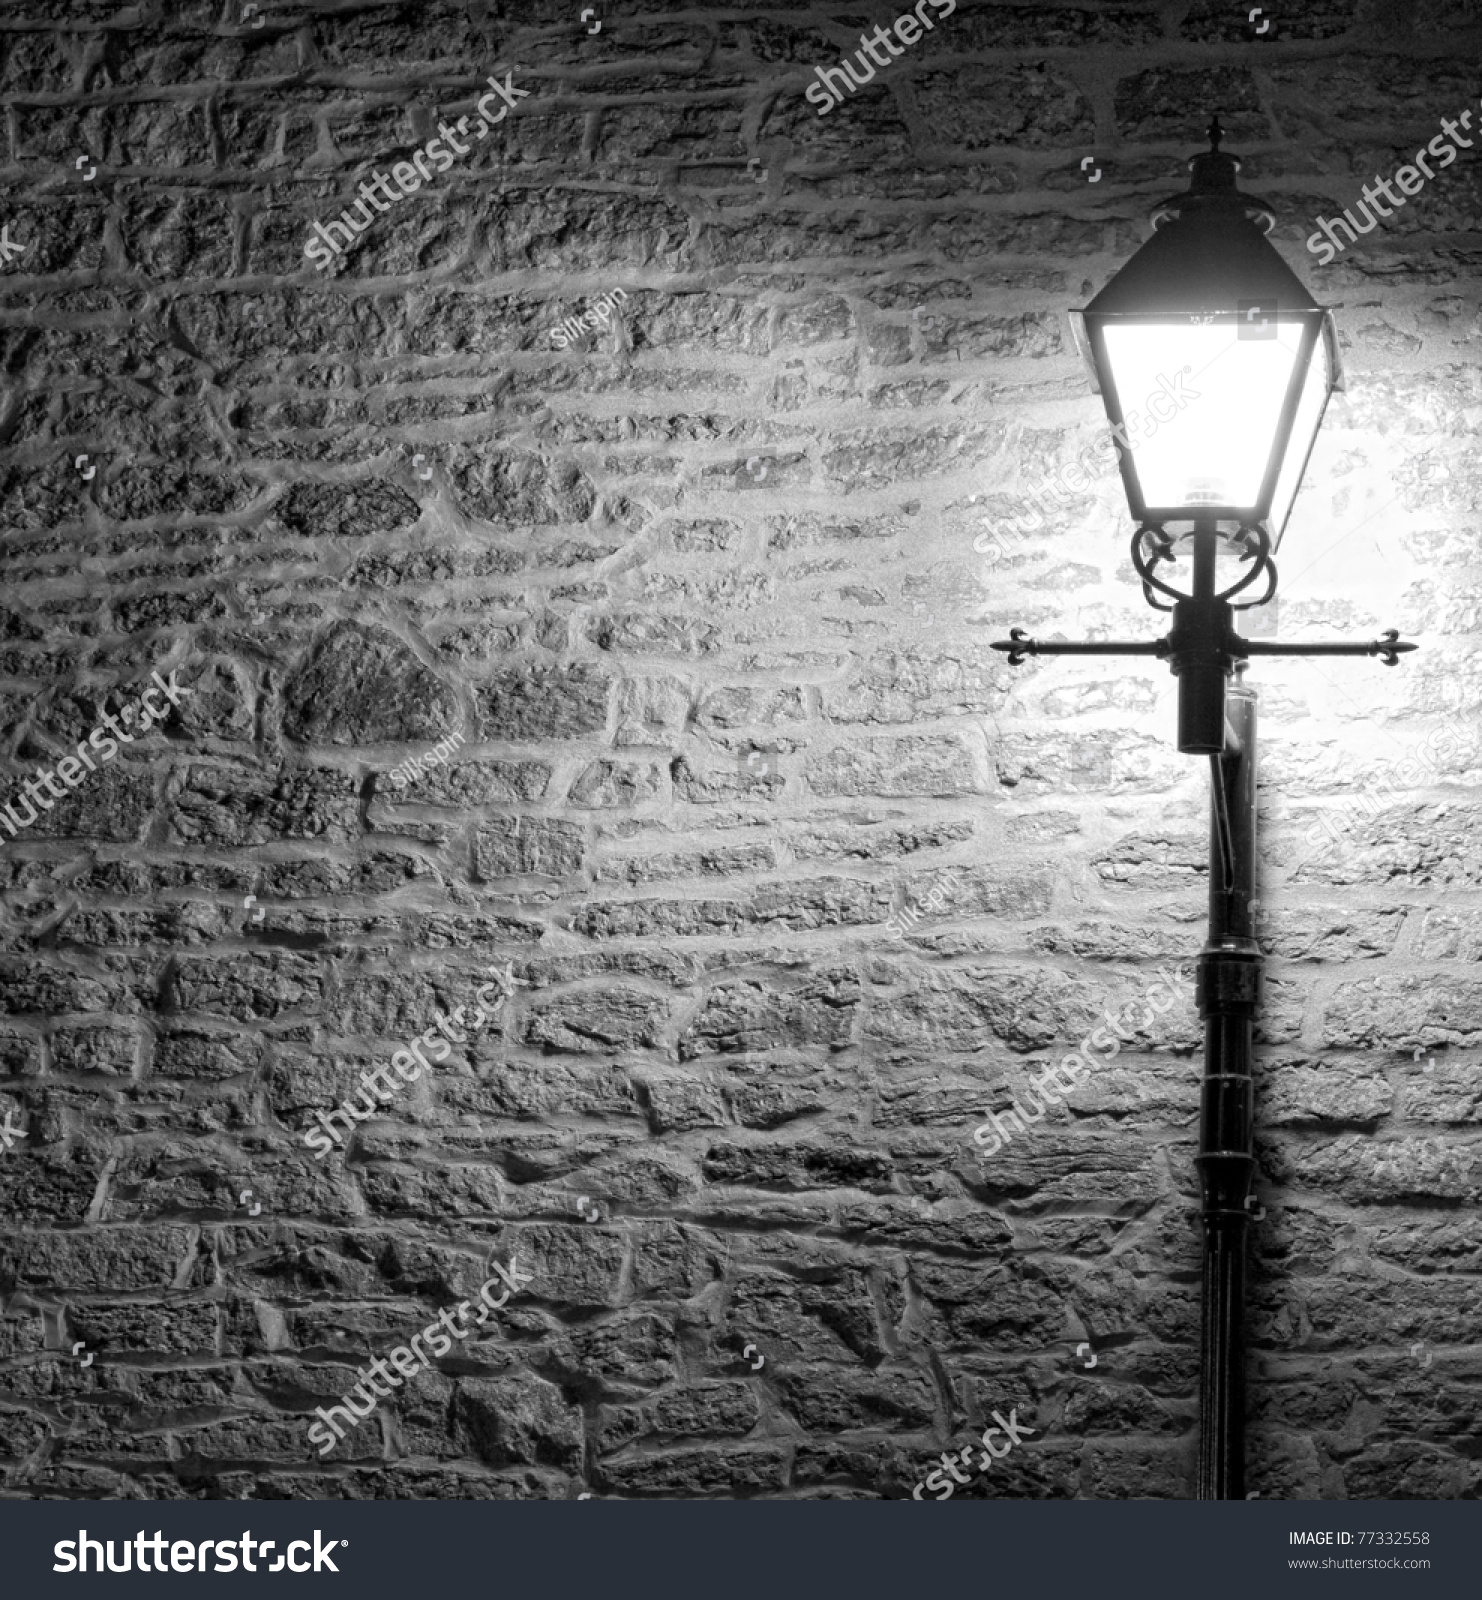 Black And White Image Of A Brightly Lit Lamp Post Against A Textured ...